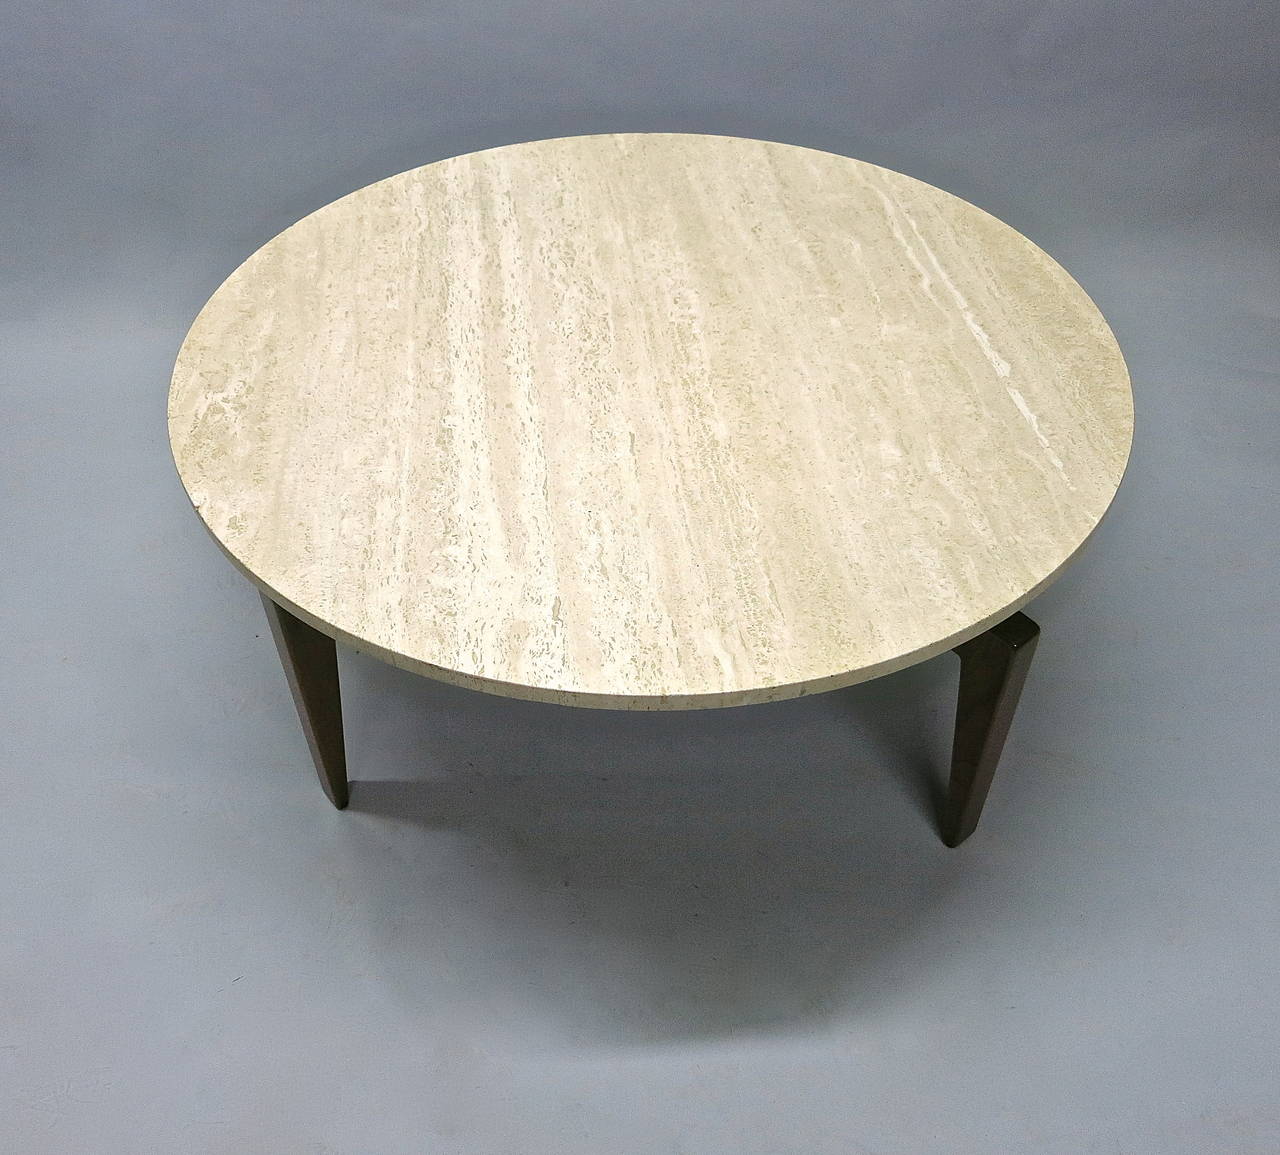 Mid-20th Century Rotating Coffee Table Labeled Jens Risom Design Inc. circa 1950, American